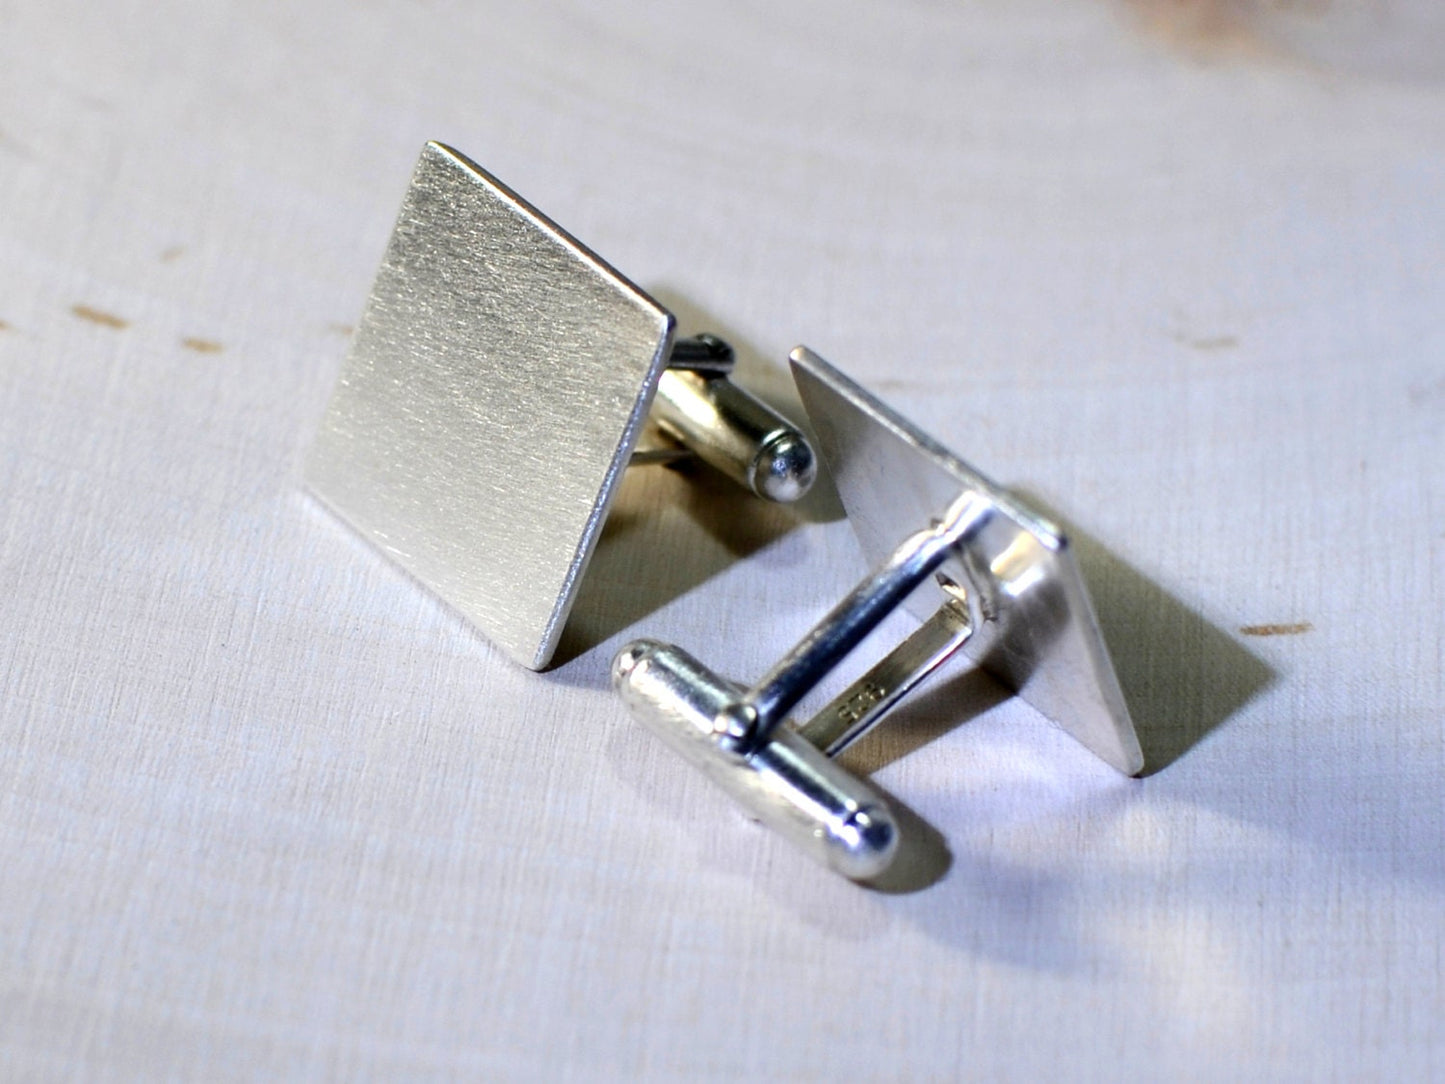 Sterling silver square cuff links for you to personalize